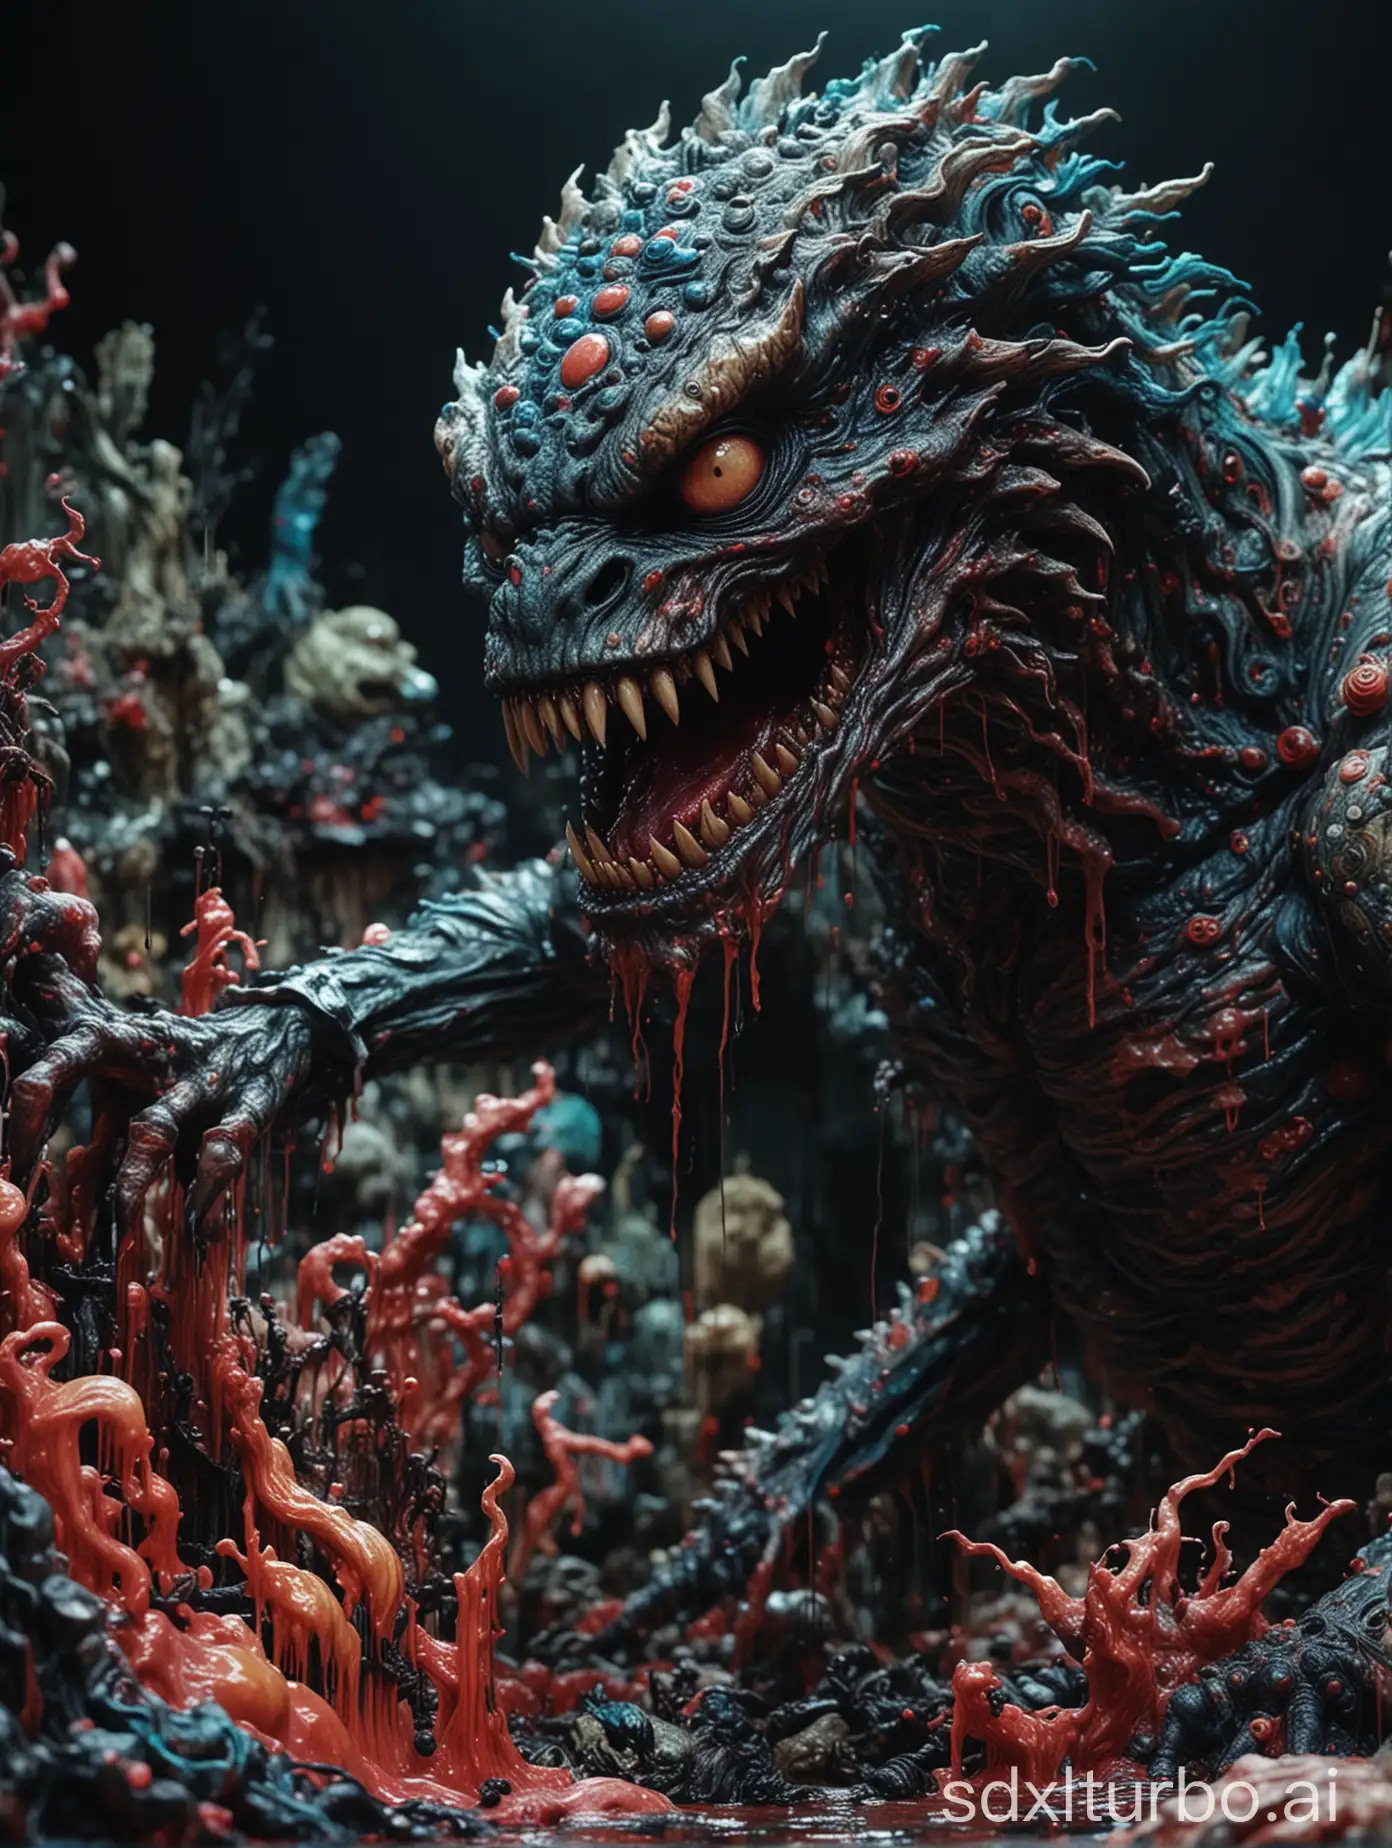 Kaiju-Monster-Phantasmagoria-Blood-The-Creatures-of-Junji-Ito-in-Retro-Colorful-Ink-and-Slime-Extreme-Detail-Hyperrealism-12K-Complex-Pose-Cinematic-Movie-Angle